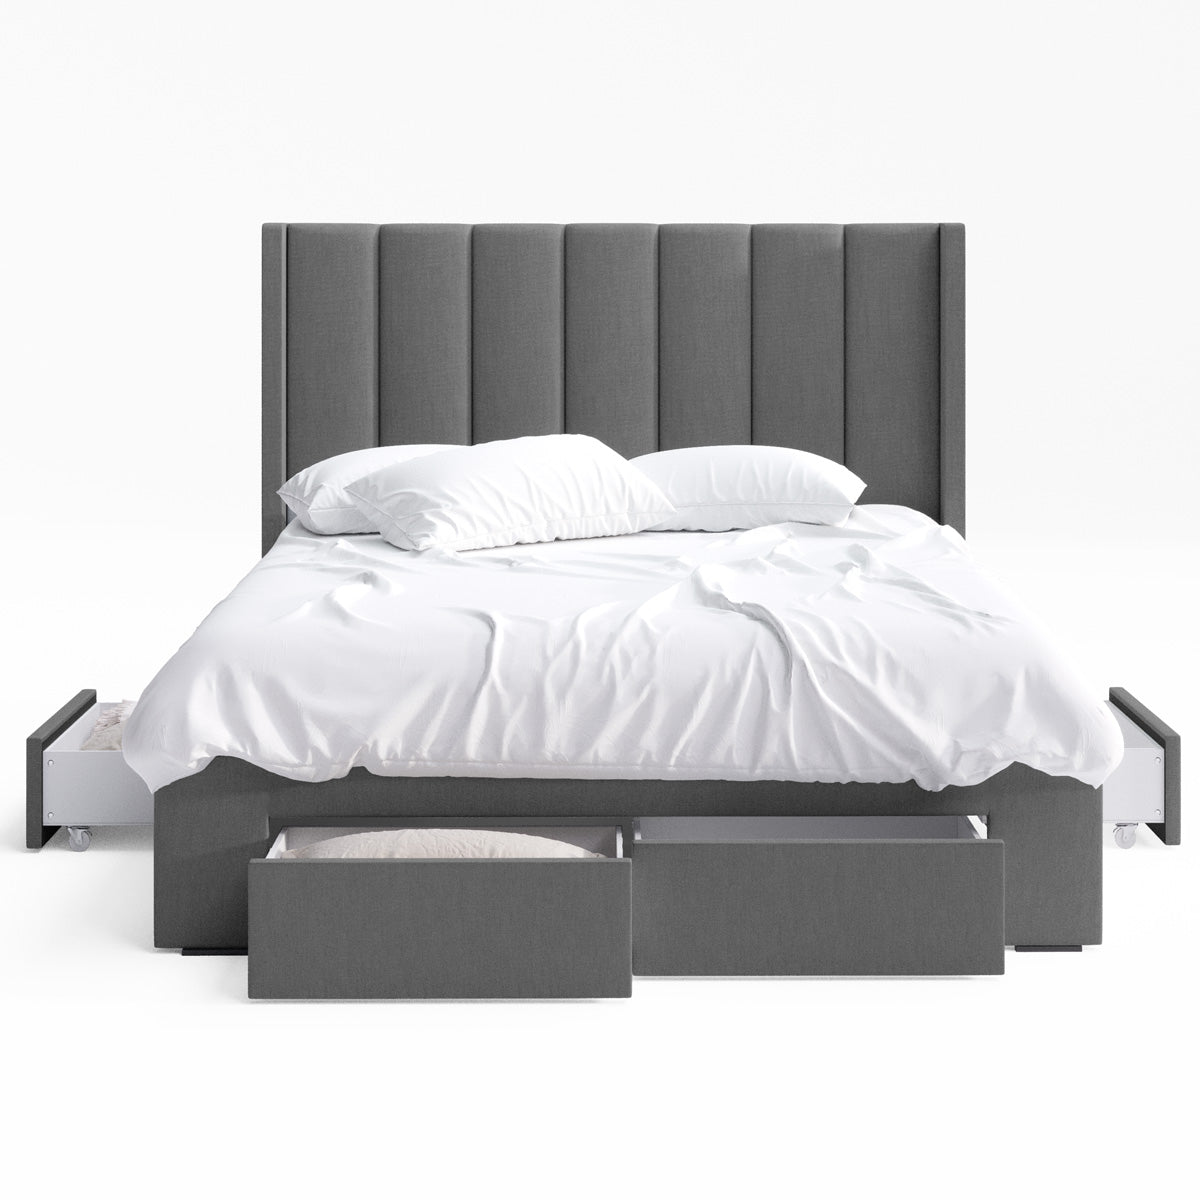 Emilie Winged Bed Frame with Four Storage Drawers (Charcoal Fabric)